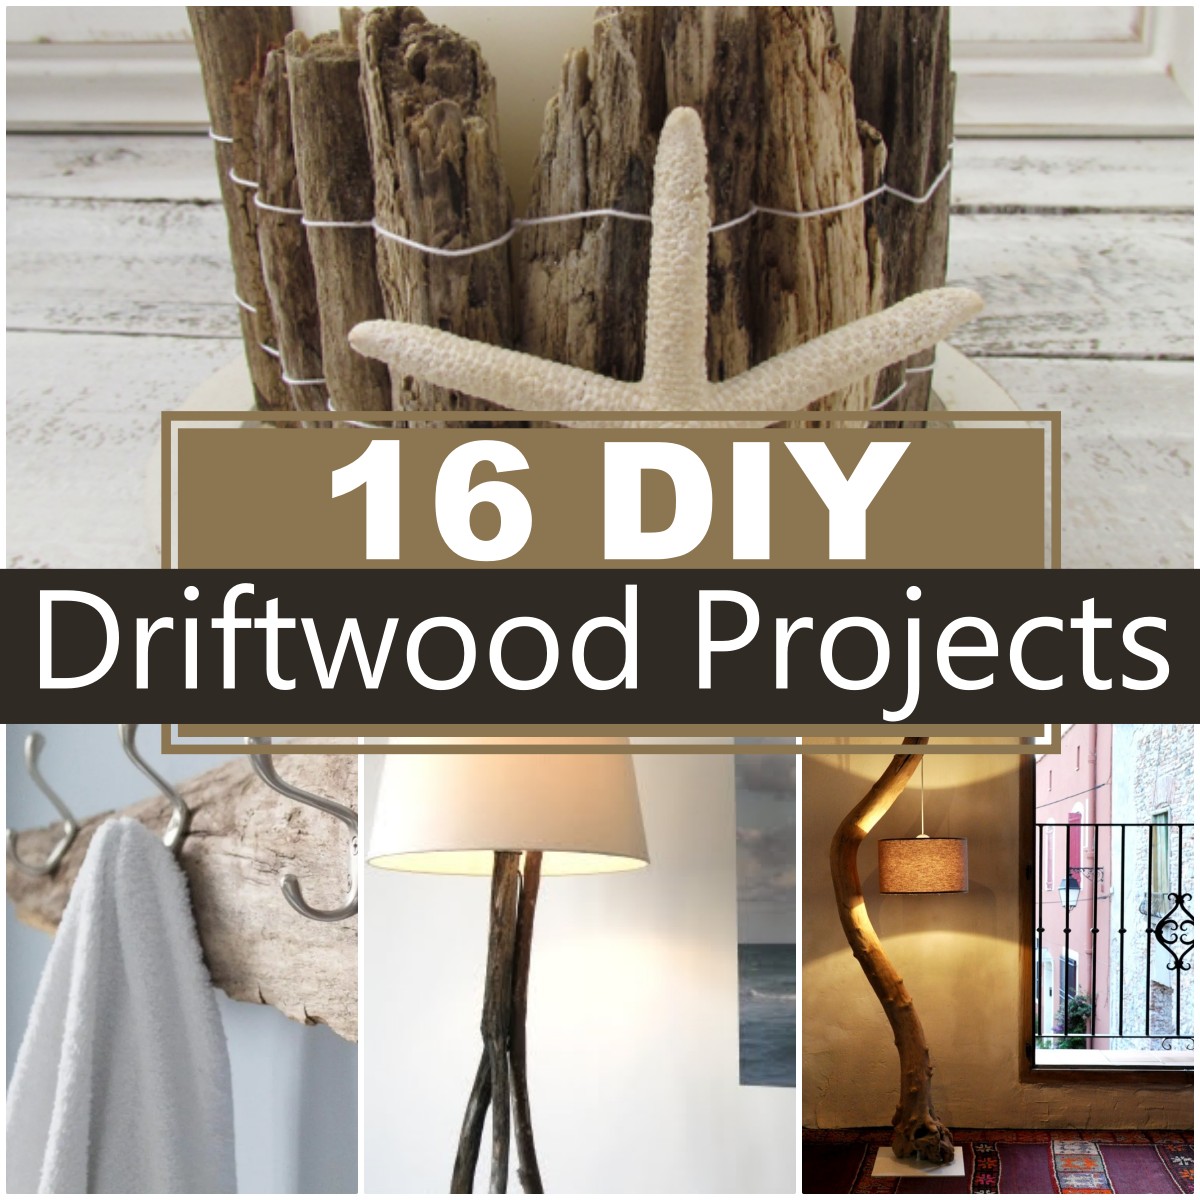 Diy Driftwood Projects For Home Decor